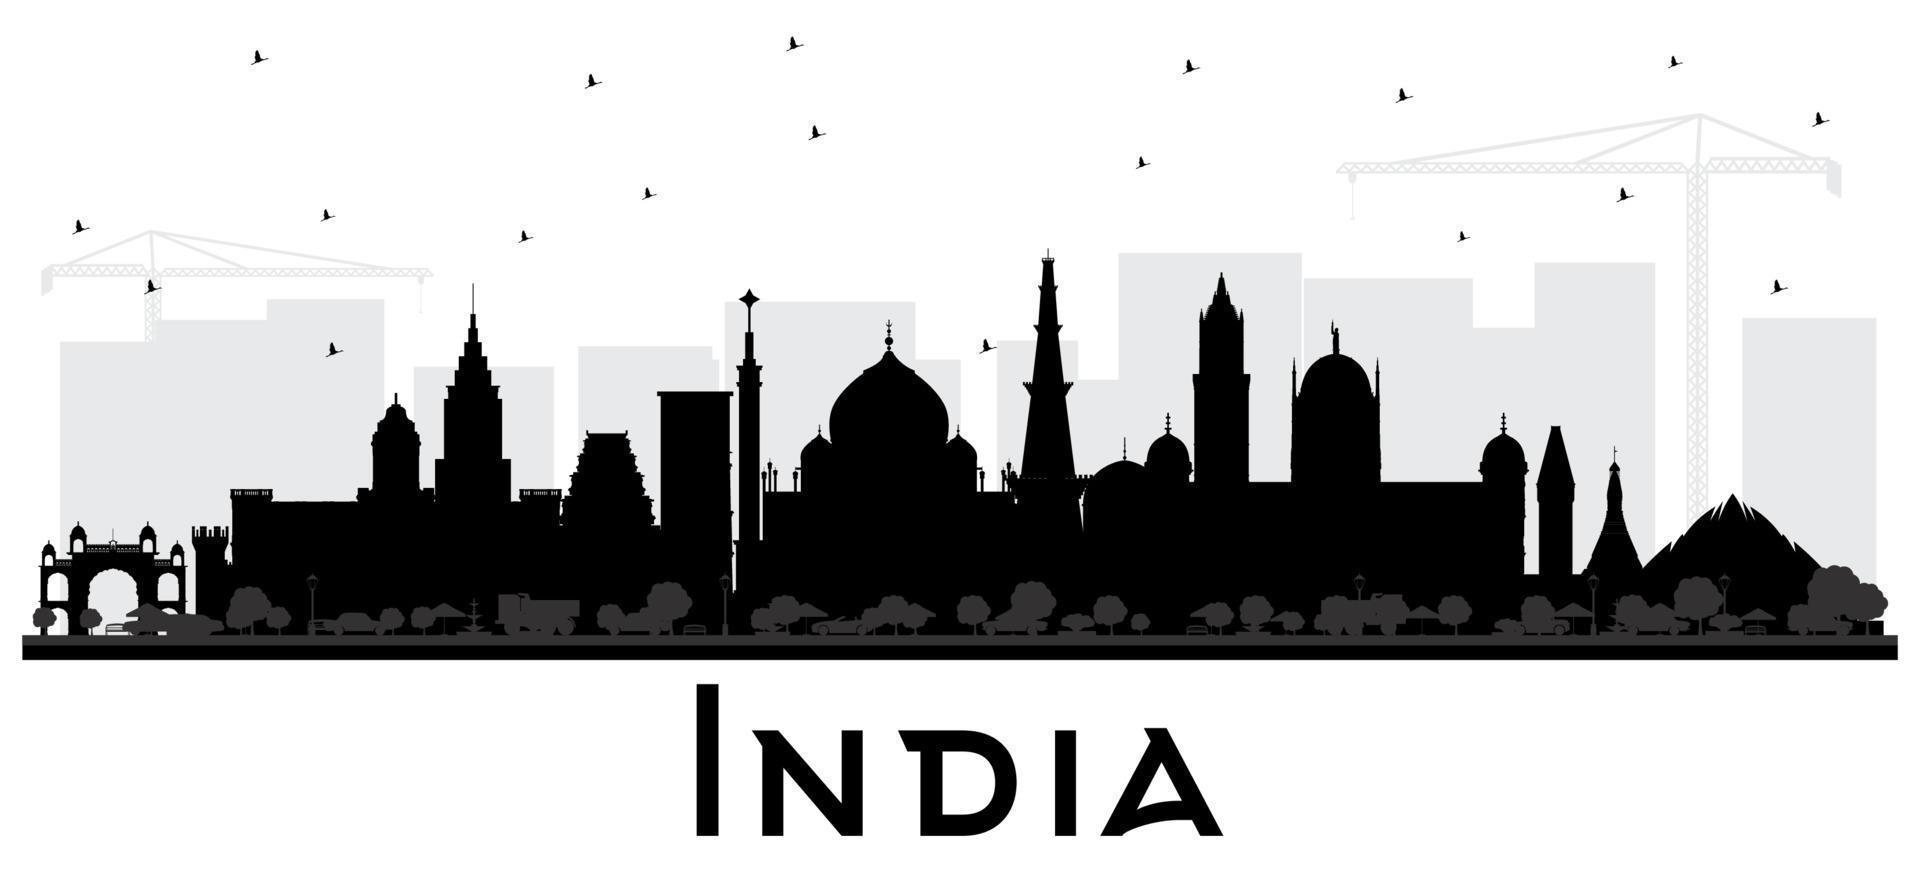 India City Skyline Silhouette with Black Buildings Isolated on White. vector